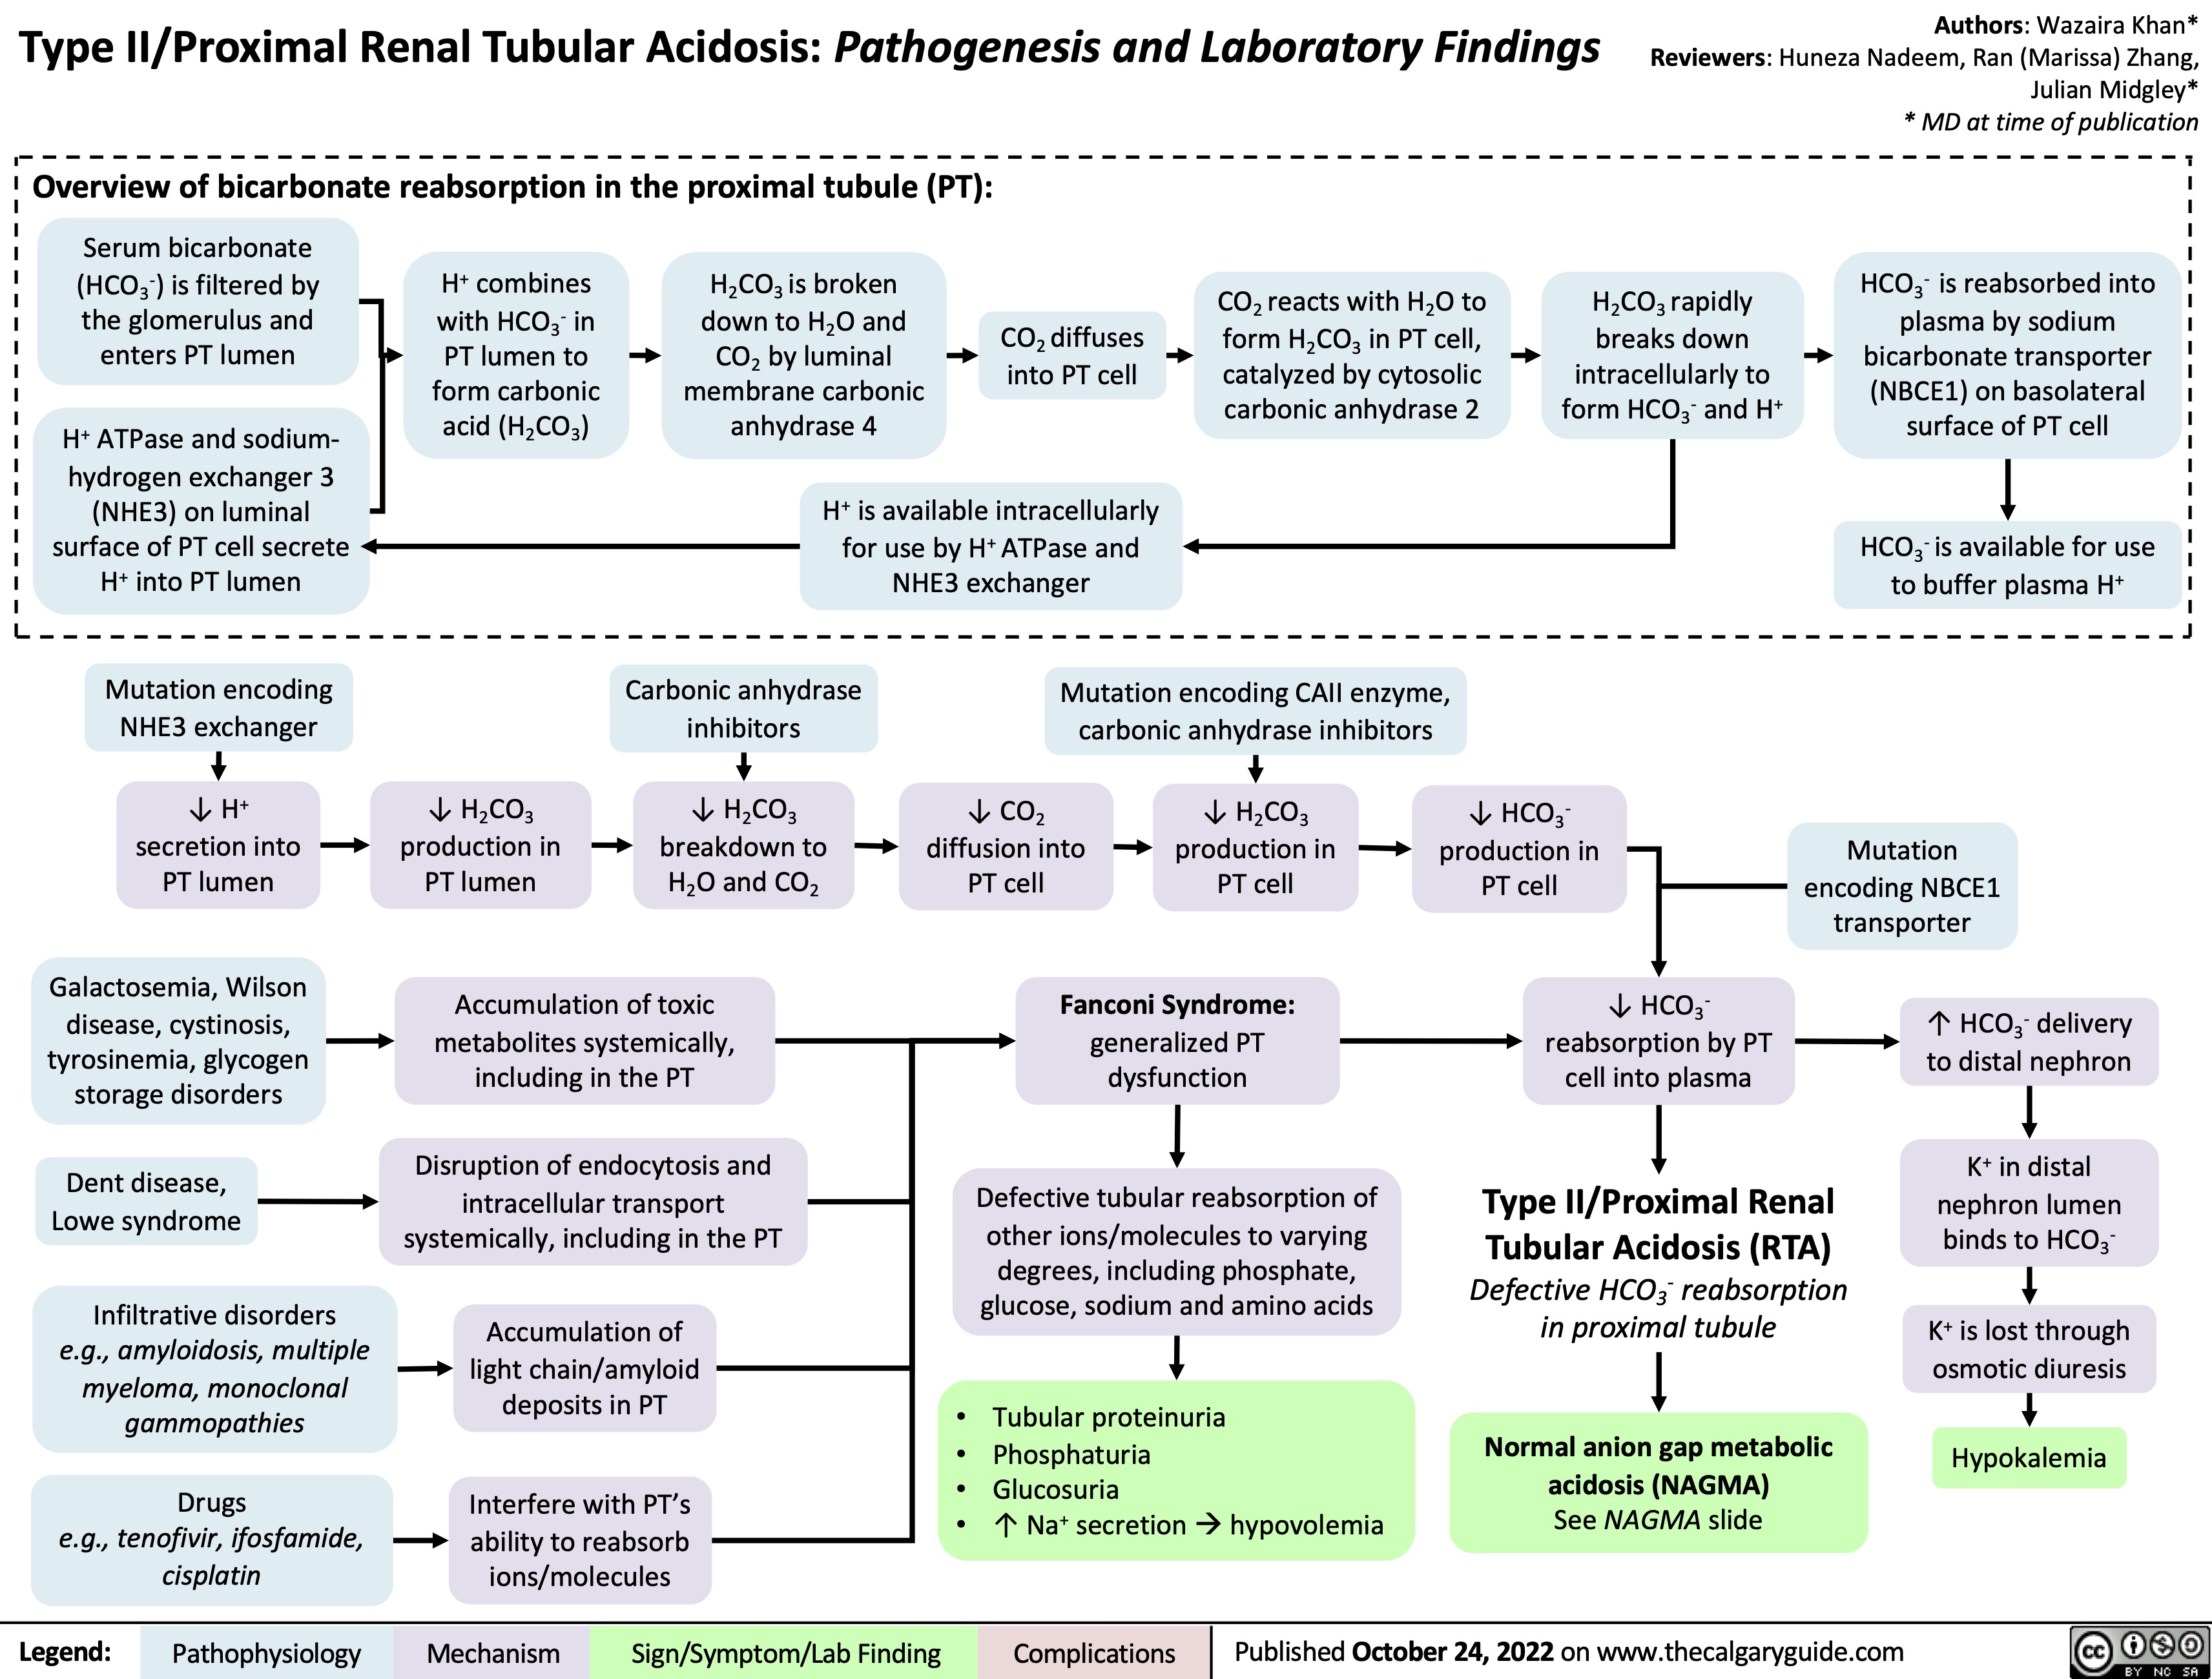 Type II/Proximal Renal Tubular Acidosis: Pathogenesis and Laboratory Findings
Authors: Wazaira Khan* Reviewers: Huneza Nadeem, Ran (Marissa) Zhang, Julian Midgley* * MD at time of publication
   Overview of bicarbonate reabsorption in the proximal tubule (PT):
 Serum bicarbonate (HCO3-) is filtered by the glomerulus and enters PT lumen
H+ ATPase and sodium- hydrogen exchanger 3
(NHE3) on luminal surface of PT cell secrete H+ into PT lumen
H+ combines with HCO3- in
PT lumen to form carbonic acid (H2CO3)
H2CO3 is broken down to H2O and CO2 by luminal membrane carbonic anhydrase 4
CO2 diffuses into PT cell
CO2 reacts with H2O to form H2CO3 in PT cell, catalyzed by cytosolic carbonic anhydrase 2
H2CO3 rapidly breaks down intracellularly to form HCO3- and H+
HCO3- is reabsorbed into plasma by sodium
bicarbonate transporter (NBCE1) on basolateral surface of PT cell
HCO3- is available for use to buffer plasma H+
          H+ is available intracellularly for use by H+ ATPase and NHE3 exchanger
      Mutation encoding NHE3 exchanger
↓ H+ secretion into PT lumen
Galactosemia, Wilson disease, cystinosis, tyrosinemia, glycogen storage disorders
Dent disease, Lowe syndrome
Infiltrative disorders
e.g., amyloidosis, multiple myeloma, monoclonal gammopathies
Drugs
e.g., tenofivir, ifosfamide, cisplatin
Carbonic anhydrase inhibitors
↓ H2CO3 breakdown to H2O and CO2
Mutation encoding CAII enzyme, carbonic anhydrase inhibitors
      ↓ H2CO3 production in PT lumen
↓ CO2 diffusion into PT cell
↓ H2CO3 production in PT cell
↓ HCO3- production in PT cell
↓ HCO3- reabsorption by PT cell into plasma
Type II/Proximal Renal Tubular Acidosis (RTA)
Defective HCO3- reabsorption in proximal tubule
Normal anion gap metabolic acidosis (NAGMA)
See NAGMA slide
      Accumulation of toxic metabolites systemically, including in the PT
Disruption of endocytosis and intracellular transport systemically, including in the PT
Accumulation of light chain/amyloid deposits in PT
Interfere with PT’s ability to reabsorb ions/molecules
• • • •
Fanconi Syndrome:
generalized PT dysfunction
Defective tubular reabsorption of other ions/molecules to varying
degrees, including phosphate, glucose, sodium and amino acids
Tubular proteinuria Phosphaturia
Glucosuria
↑ Na+ secretionàhypovolemia
Mutation encoding NBCE1 transporter
↑ HCO3- delivery to distal nephron
K+ in distal nephron lumen binds to HCO3-
K+ is lost through osmotic diuresis
Hypokalemia
                 Legend:
 Pathophysiology
Mechanism
Sign/Symptom/Lab Finding
 Complications
 Published October 24, 2022 on www.thecalgaryguide.com
   